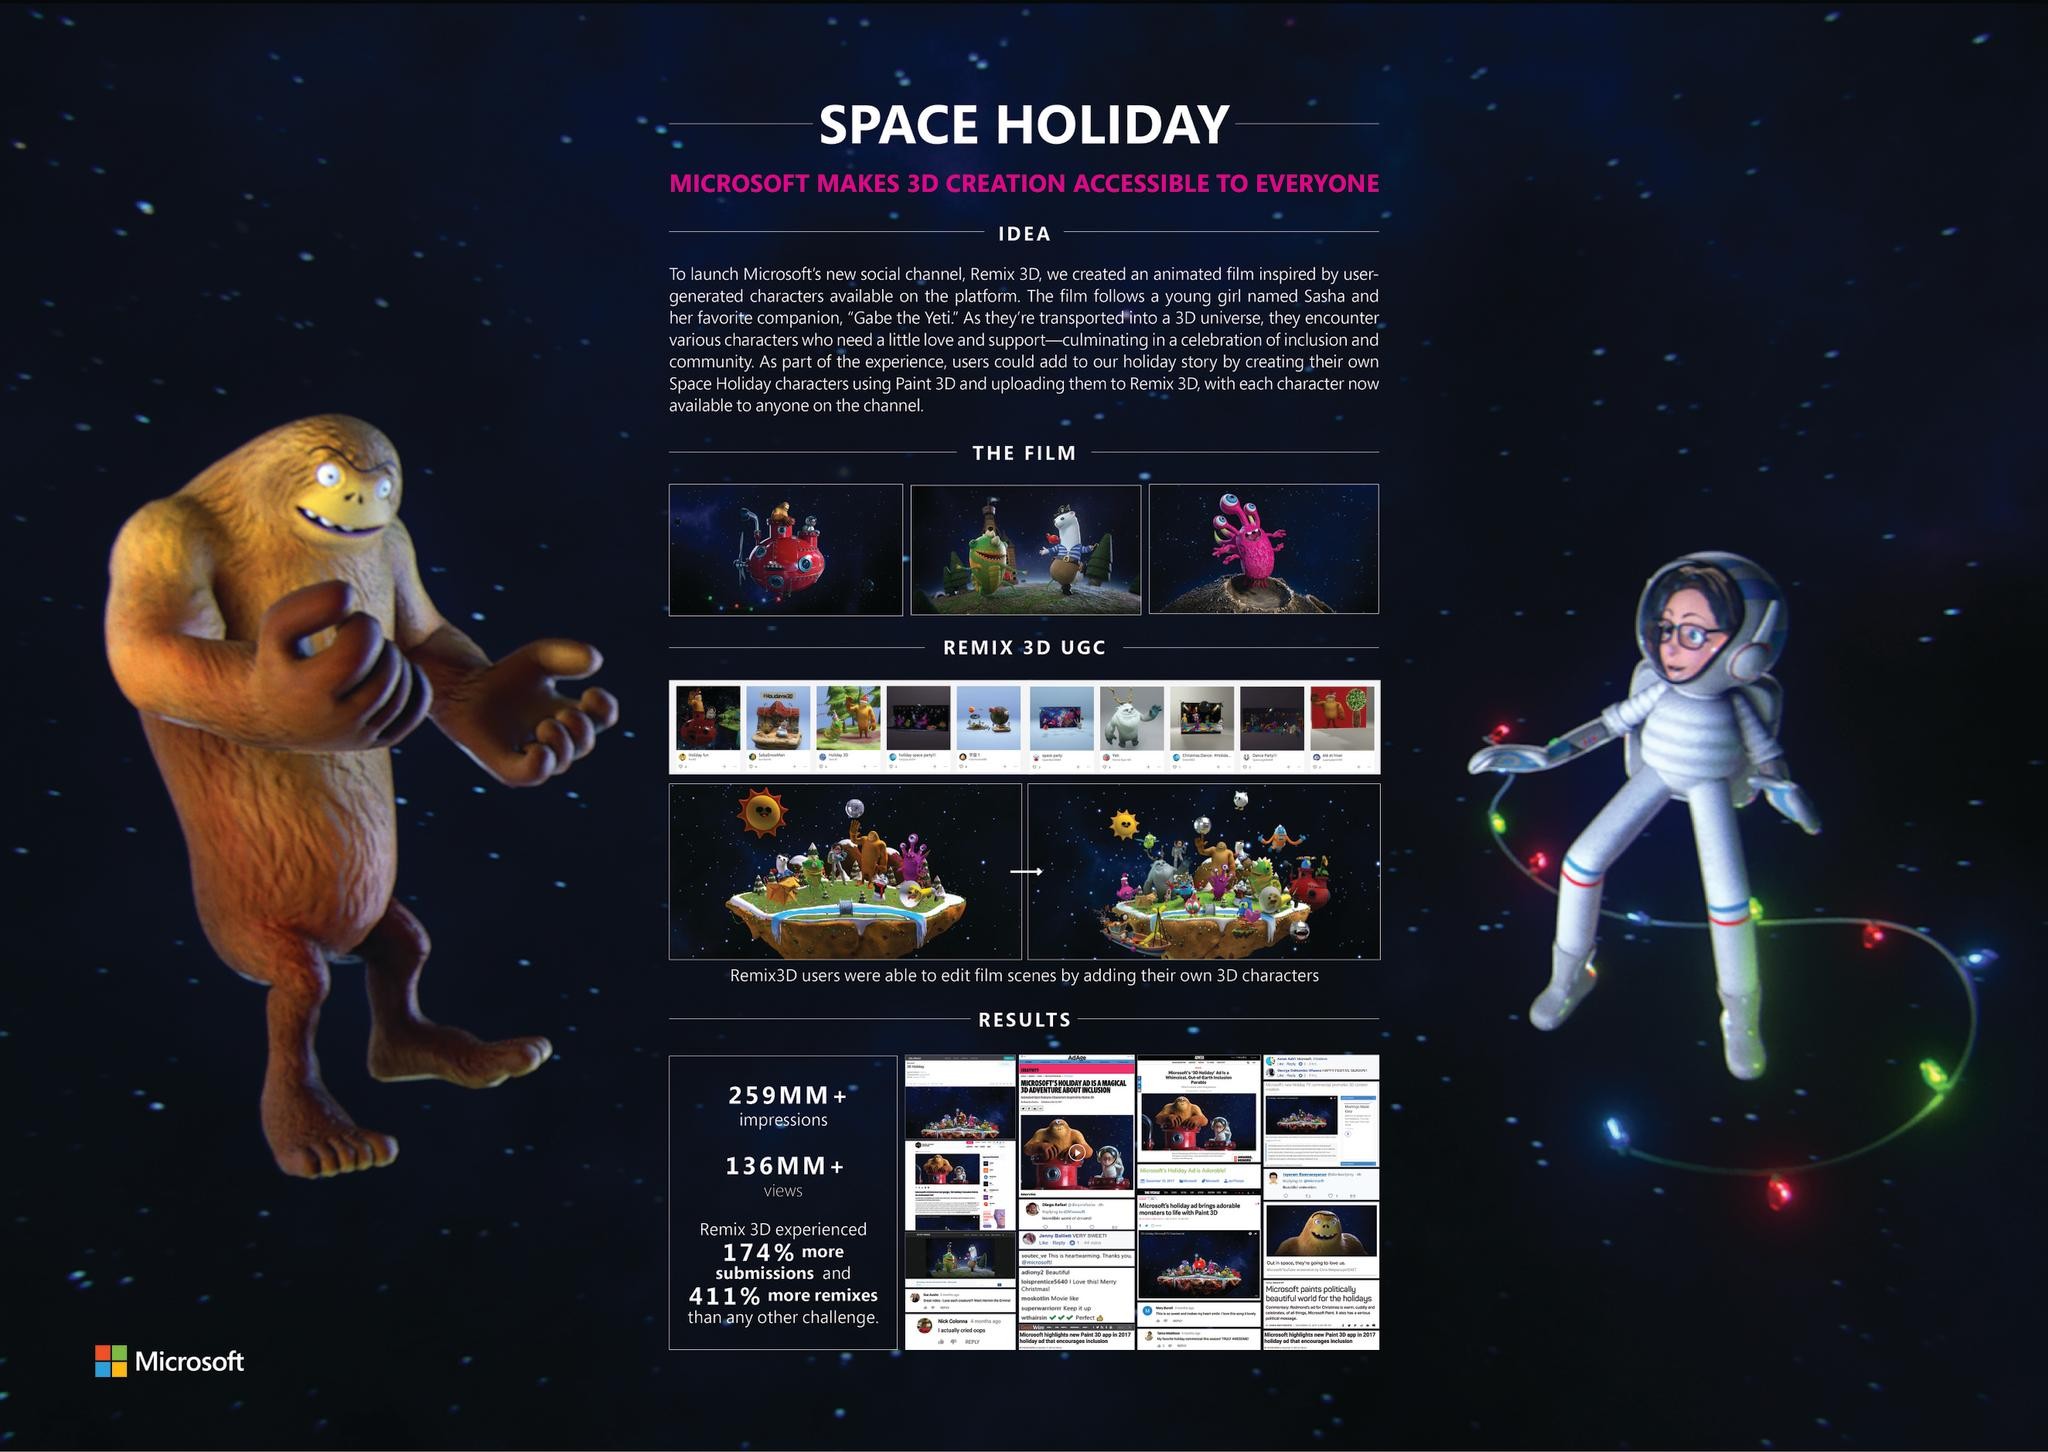 Space Holiday